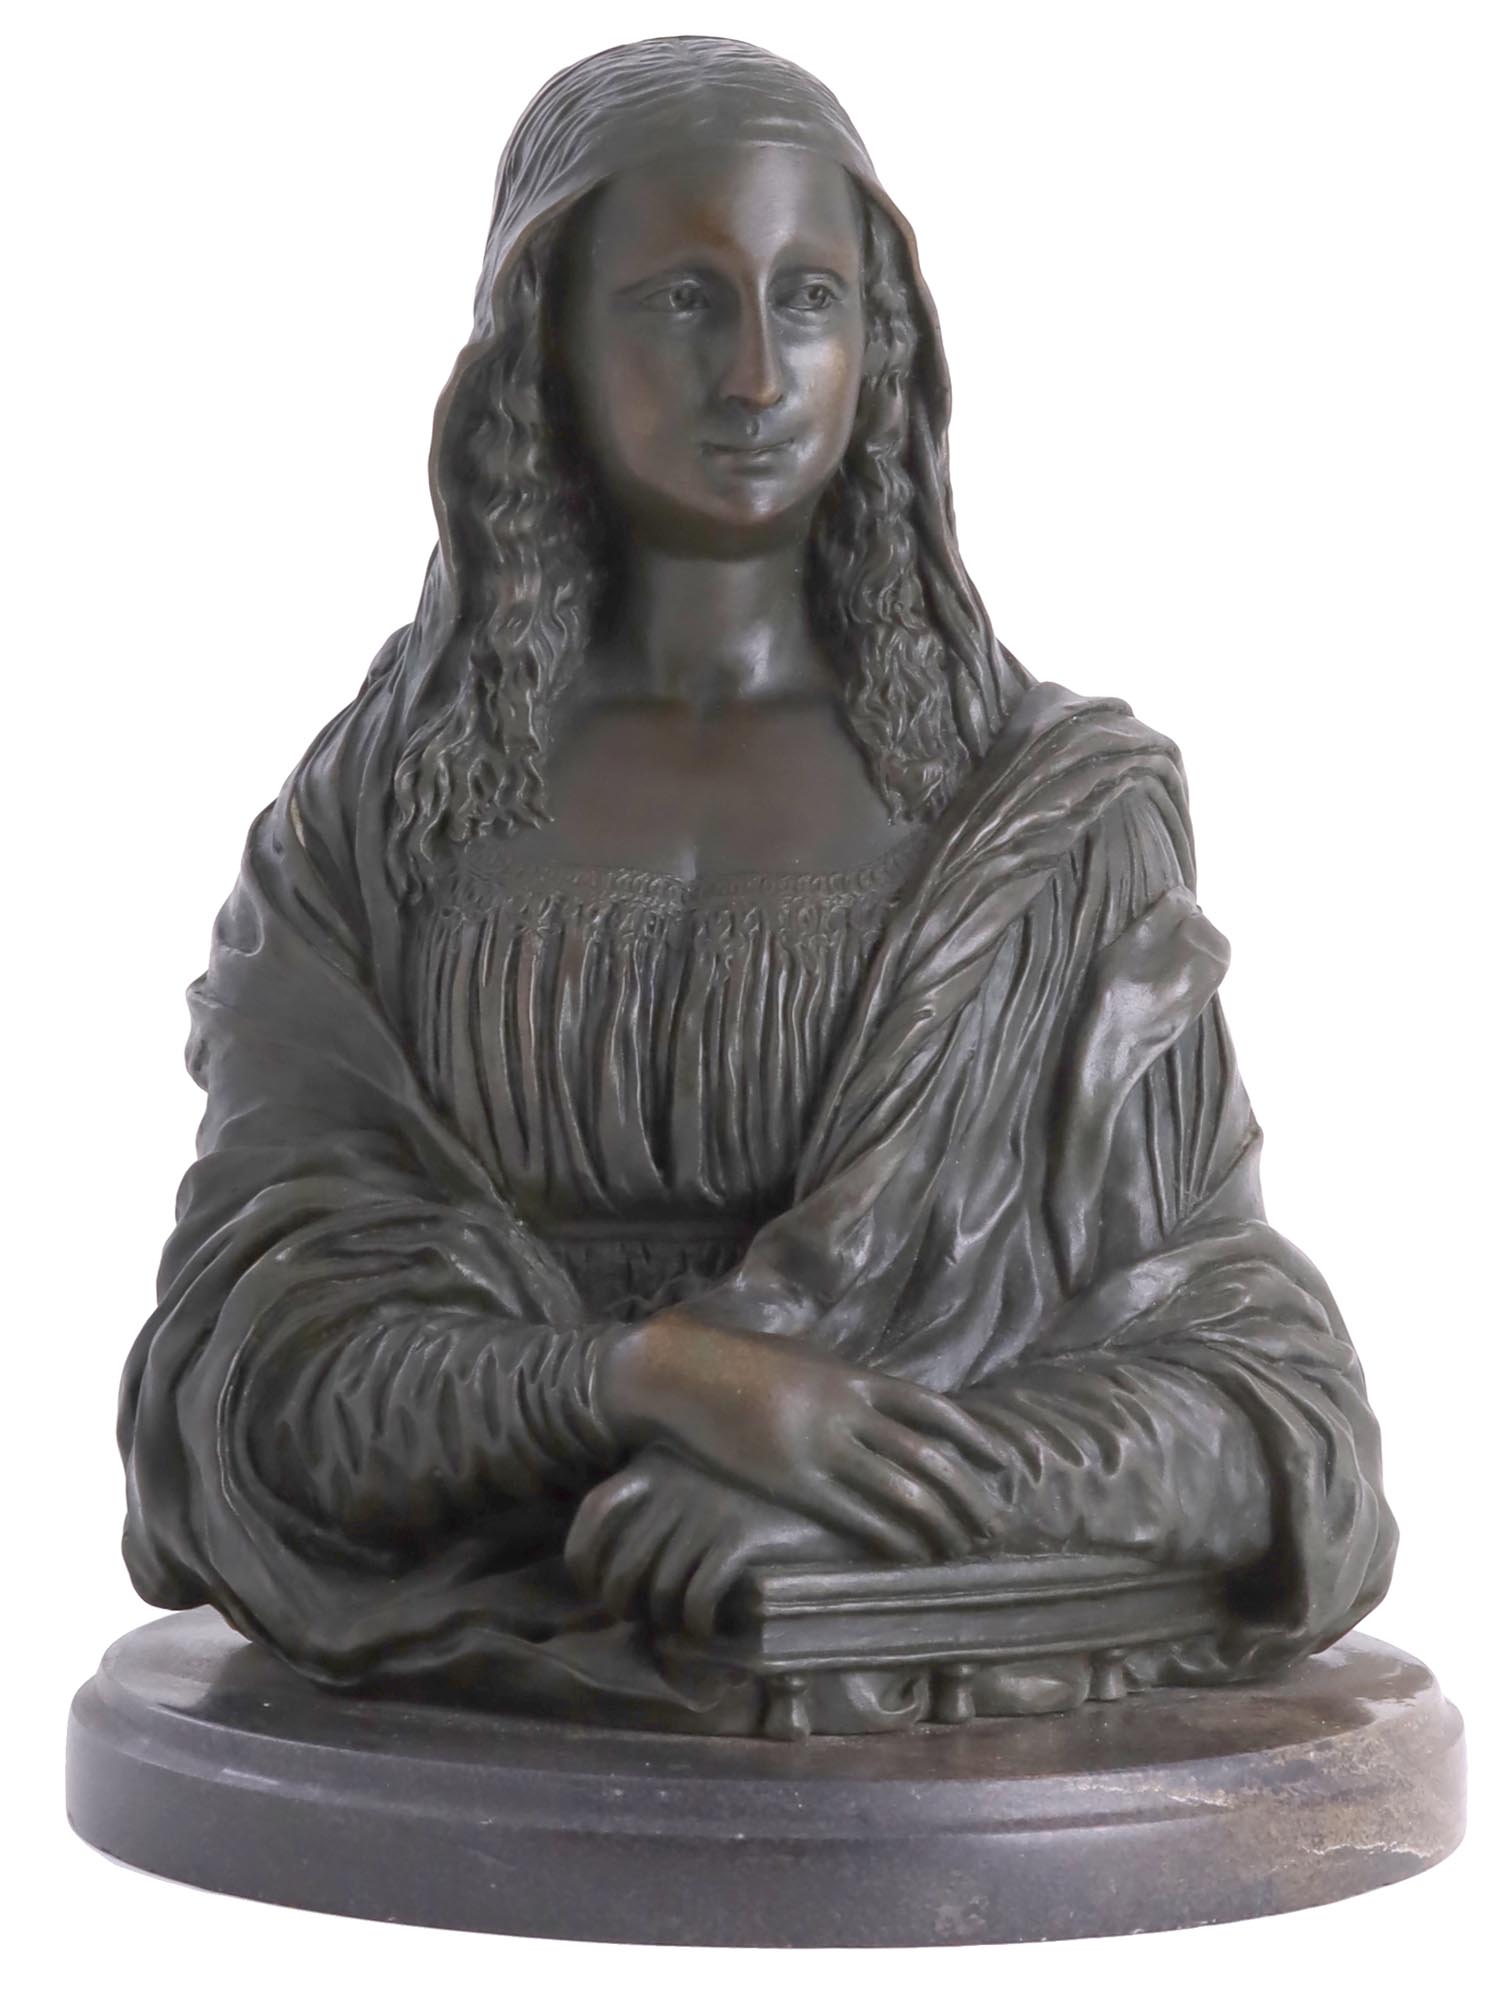 ANTIQUE 19TH C BRONZE BUST OF MONA LISA BY DUMAS PIC-0